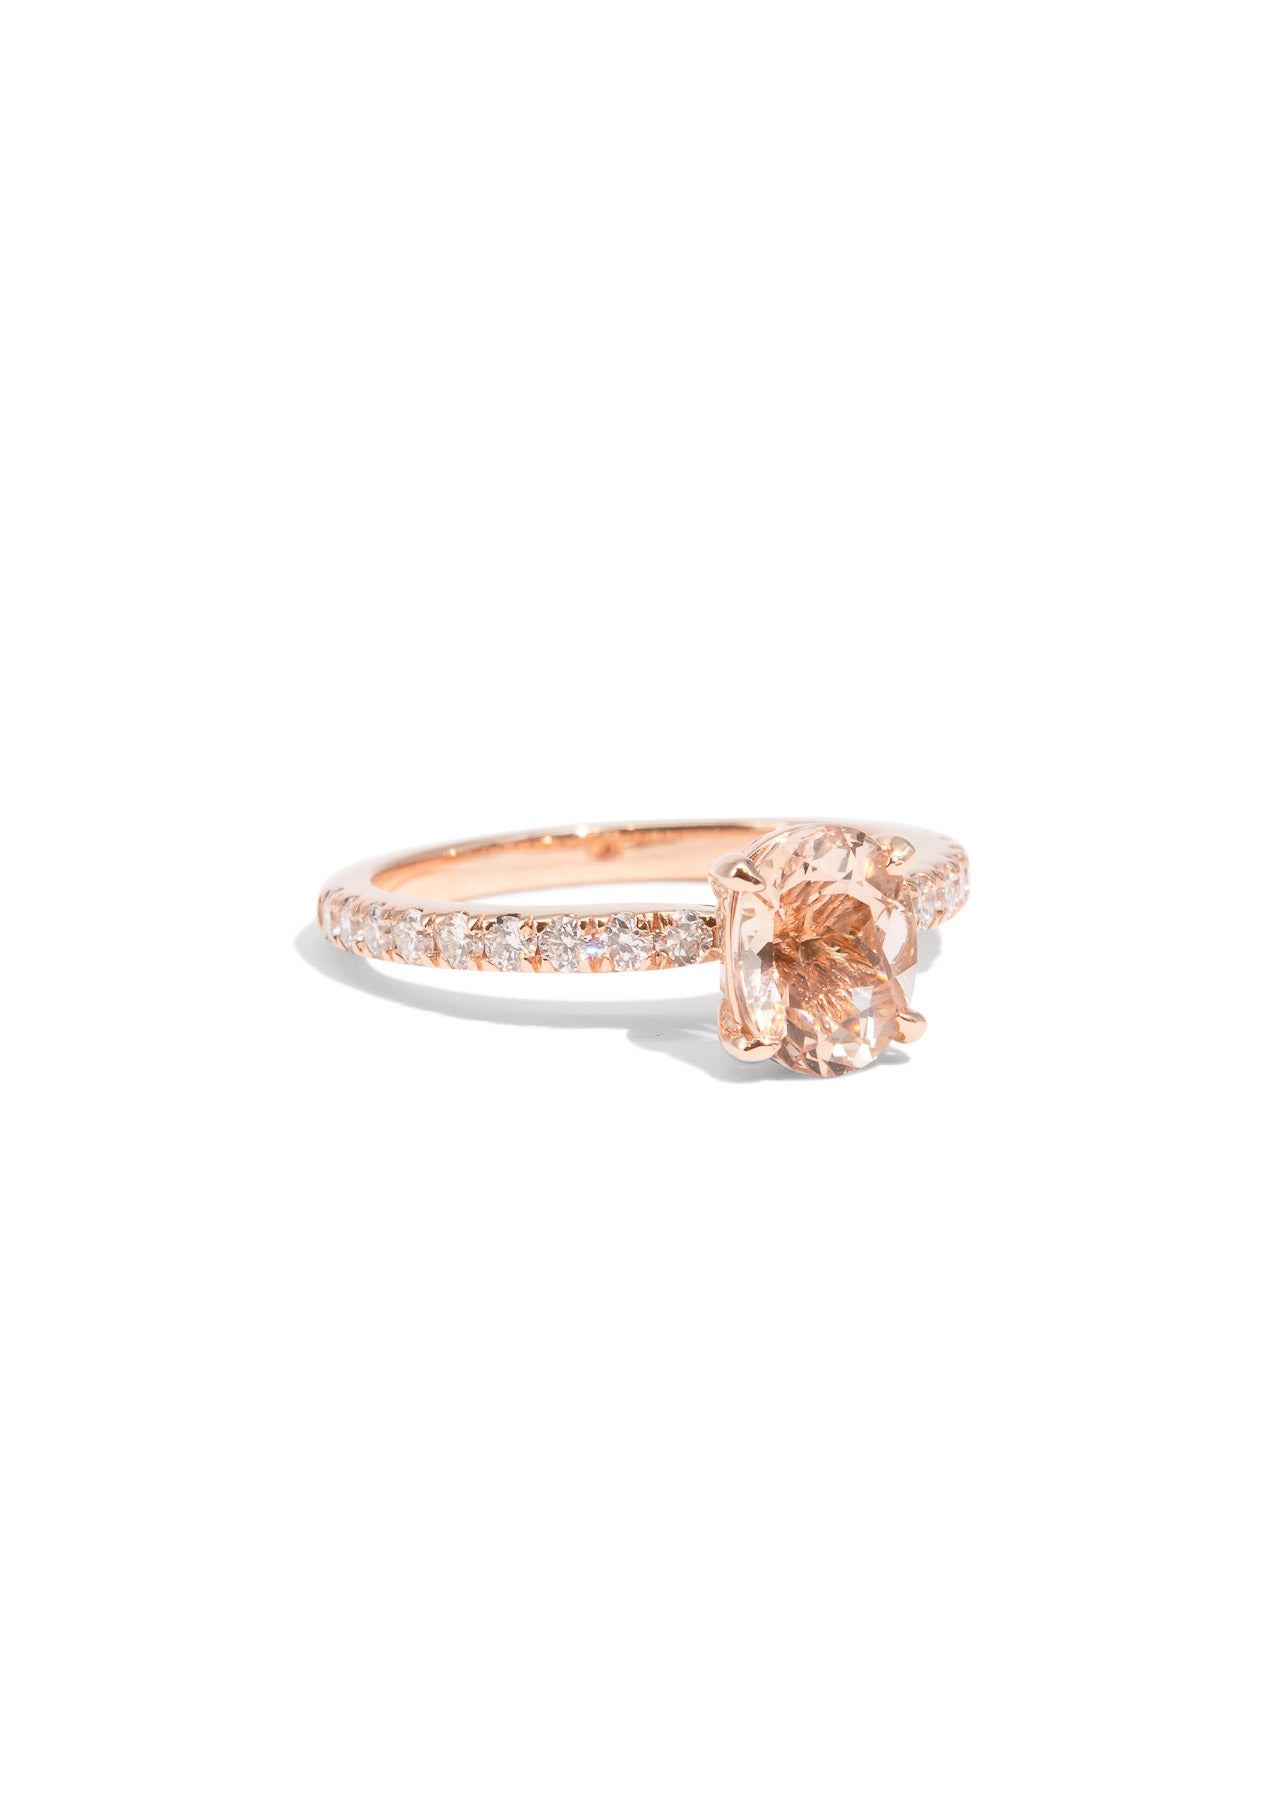 The Adoria Ring with 1.25ct Morganite